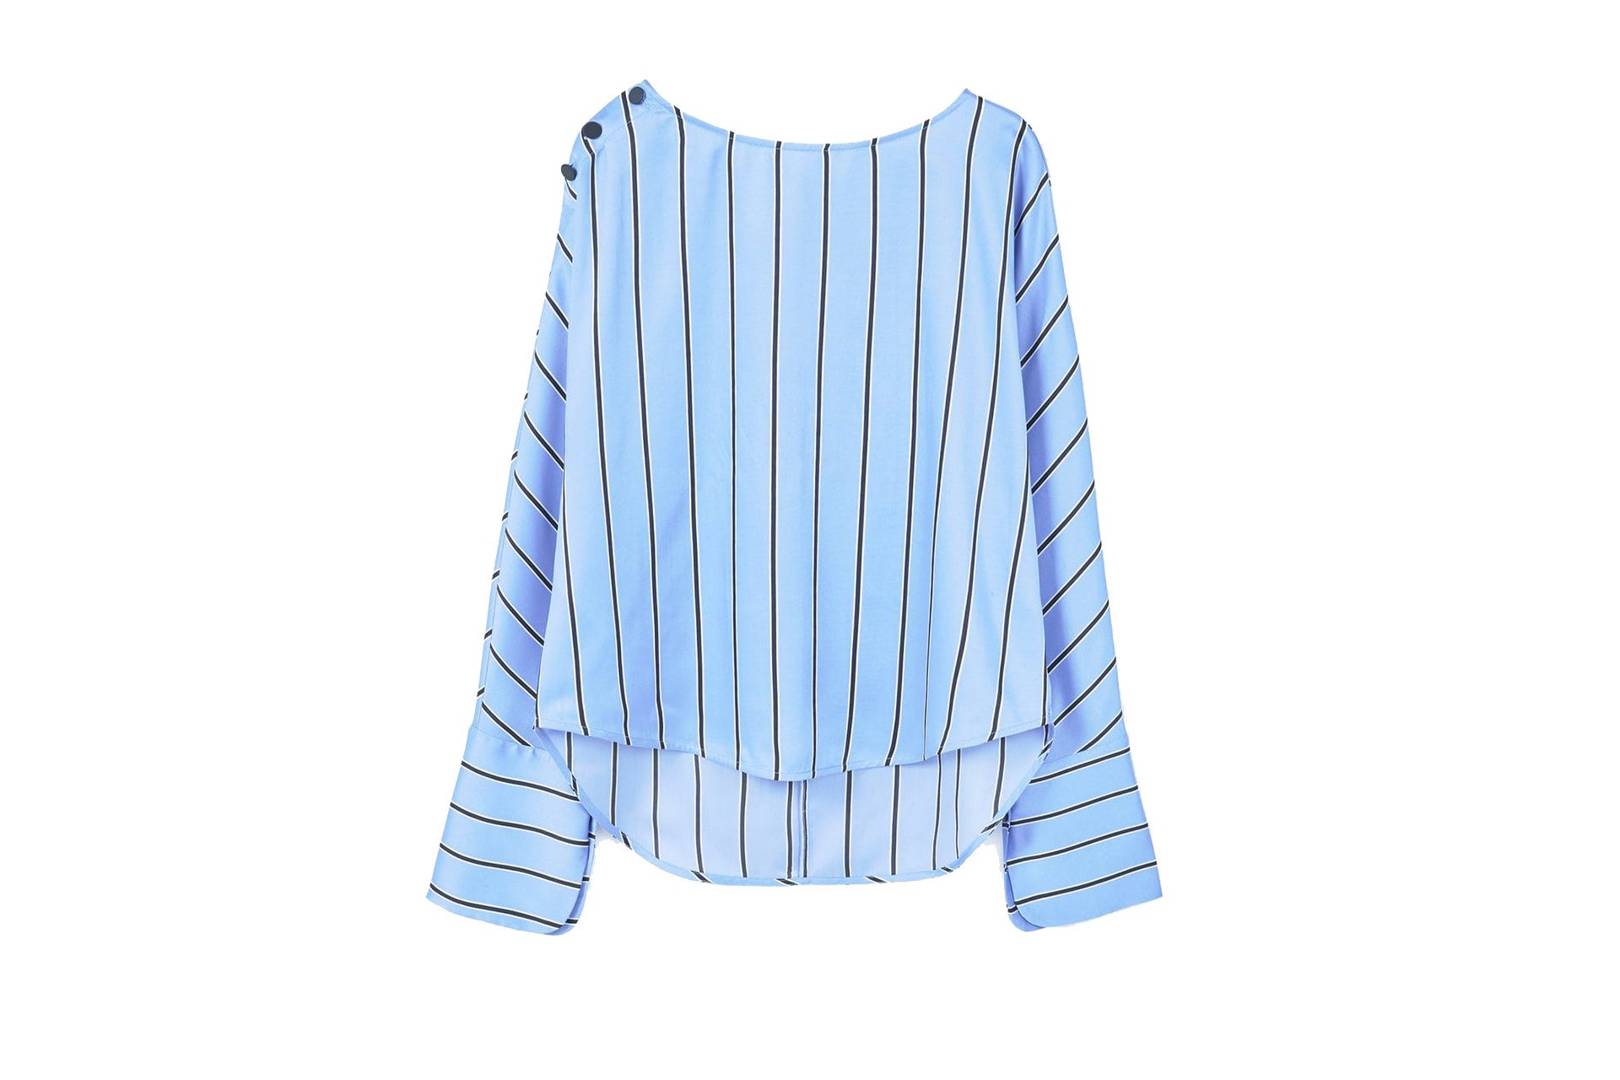 New shirt styles; oversized, off shoulder and long sleeves | Glamour UK